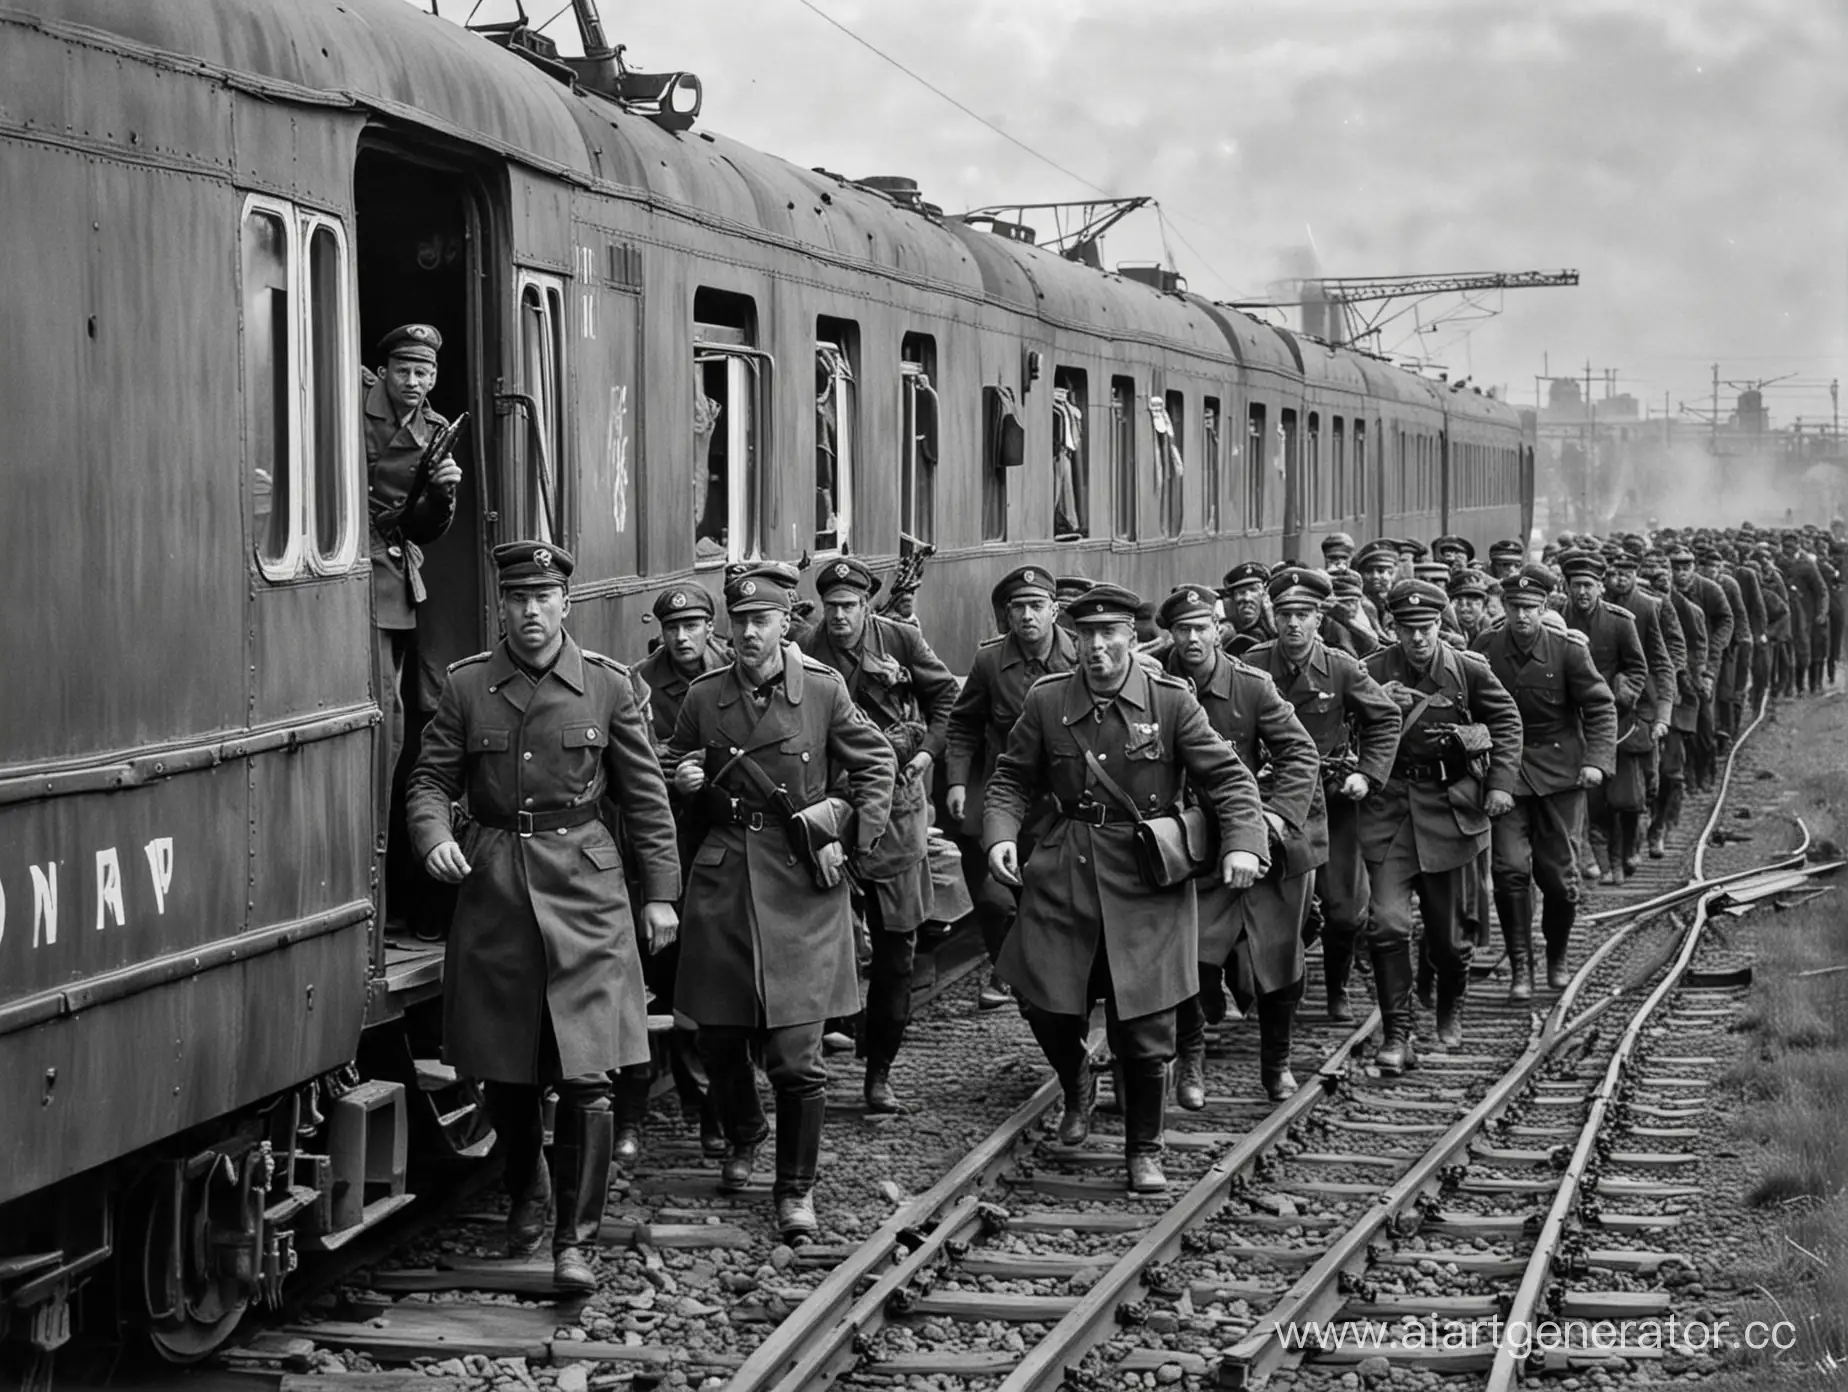 1930s-Commuter-Train-Raid-by-Special-Forces